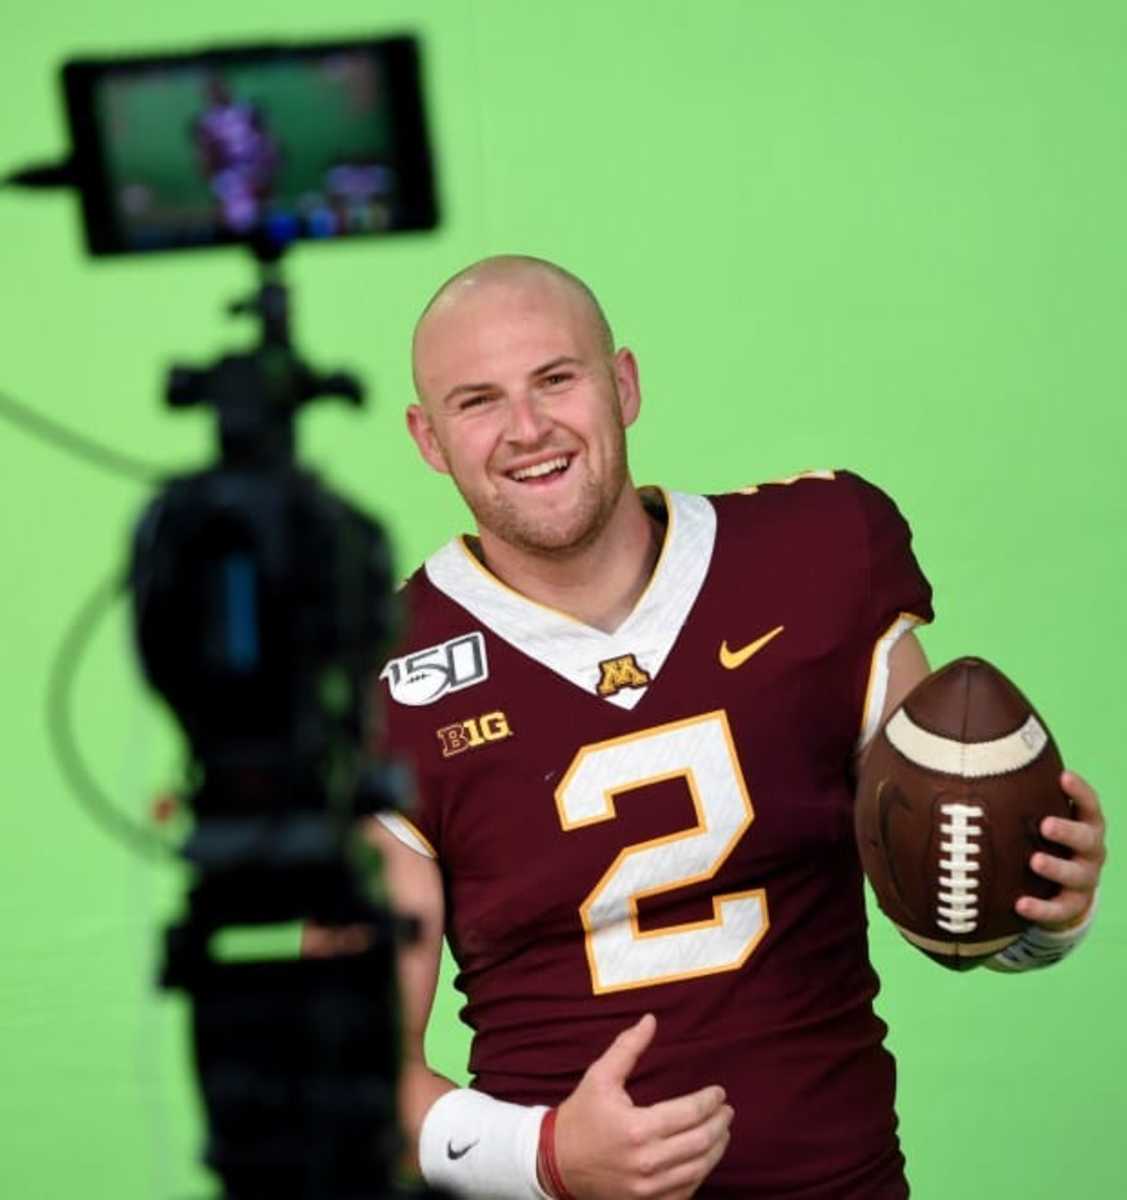 Quarterback Tanner Morgan dances for a game day video segment during the Minnesota Gophers football team media day in Minneapolis on Tuesday, July 30, 2019. (John Autey / Pioneer Press)